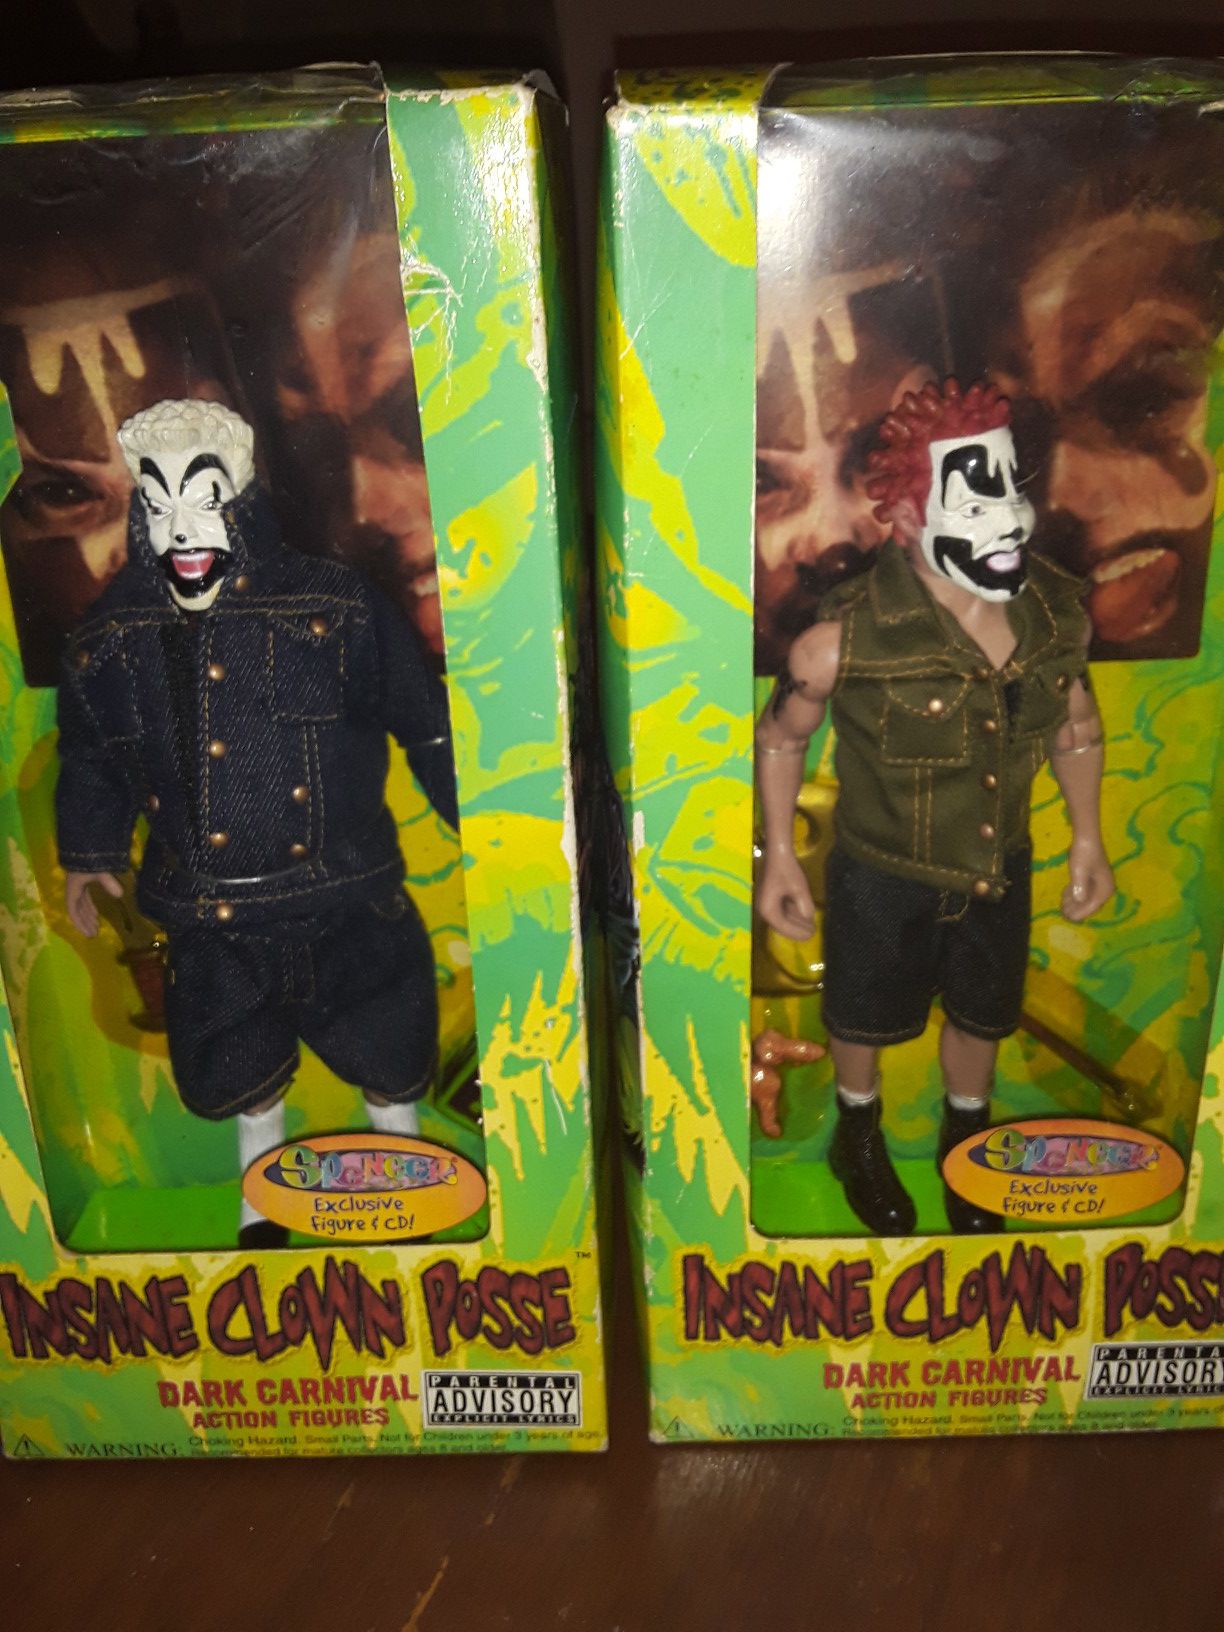 ICP DARK CARNIVAL ACTION FIGURES SPENCER EDITION "RARE"